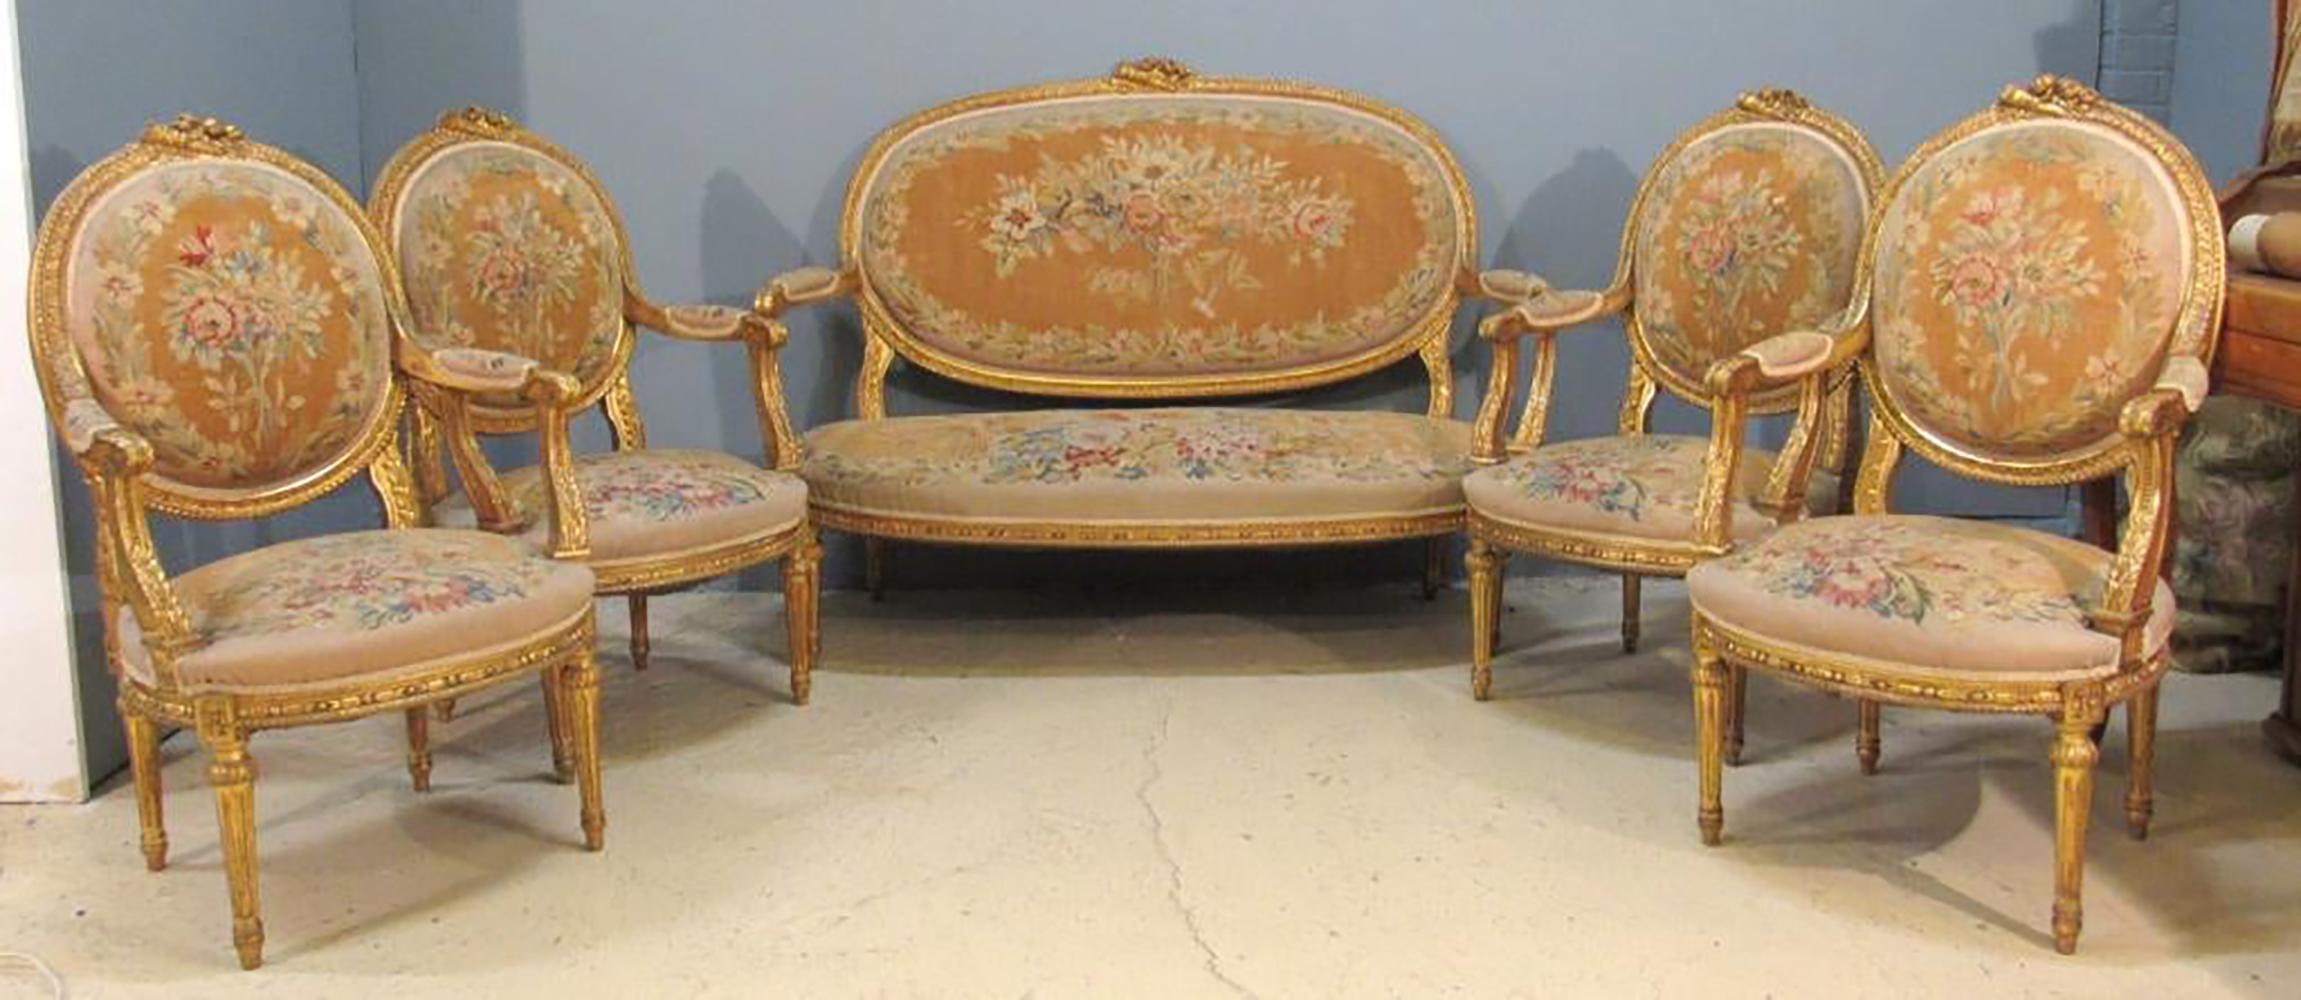 Finest 19th century Louis XVI style Aubusson salon / parlor set. A settee and four Fauteuil's comprise this stunning and breathtaking Salon Set. The Louis XVI Style Aubusson Upholstery is in very fine condition having vibrant colors in a floral